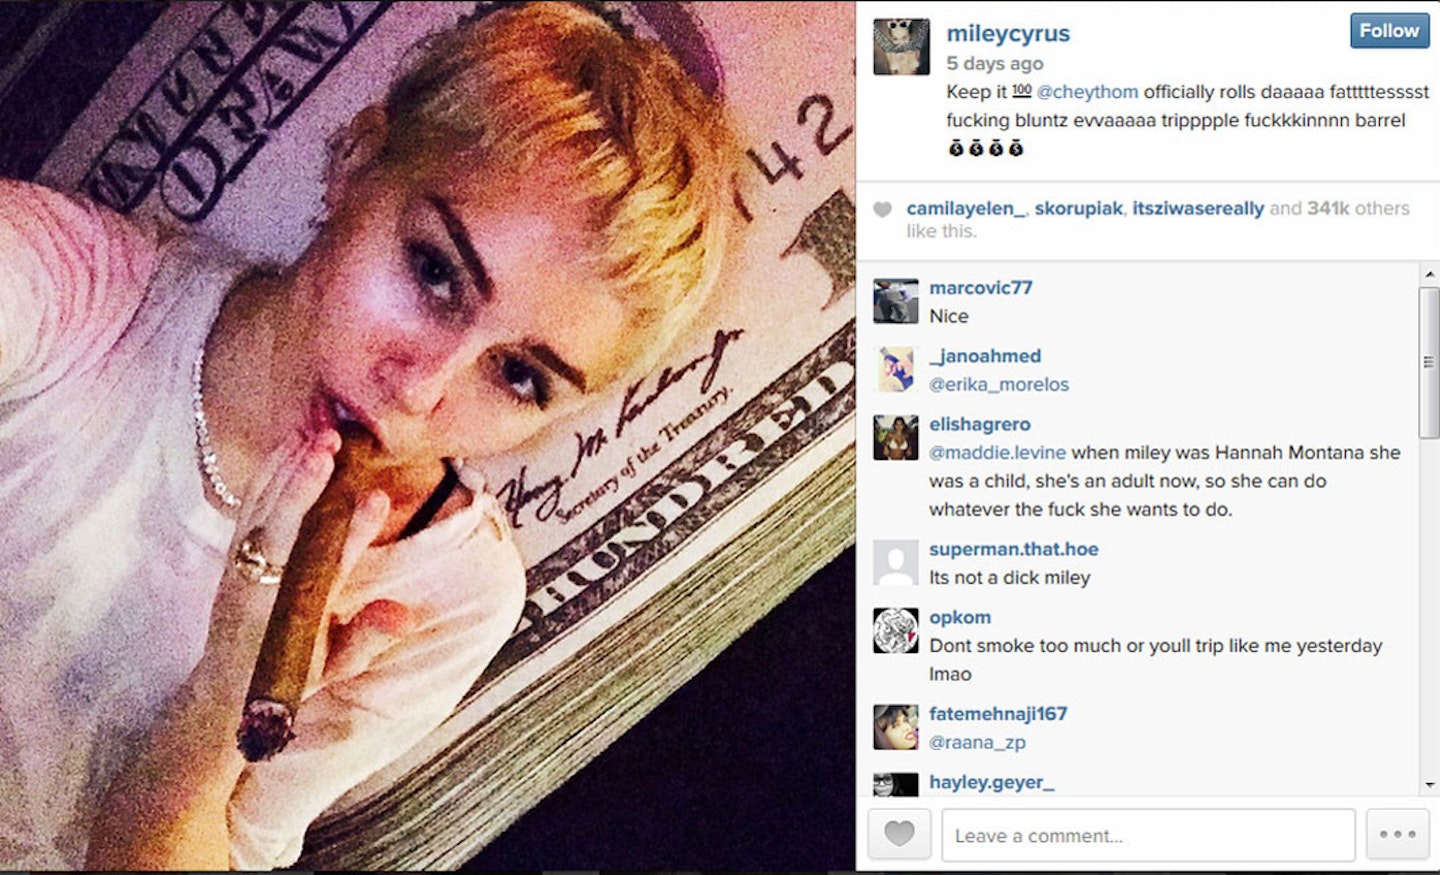 Miley is no stranger to posting pictures talking about drugs